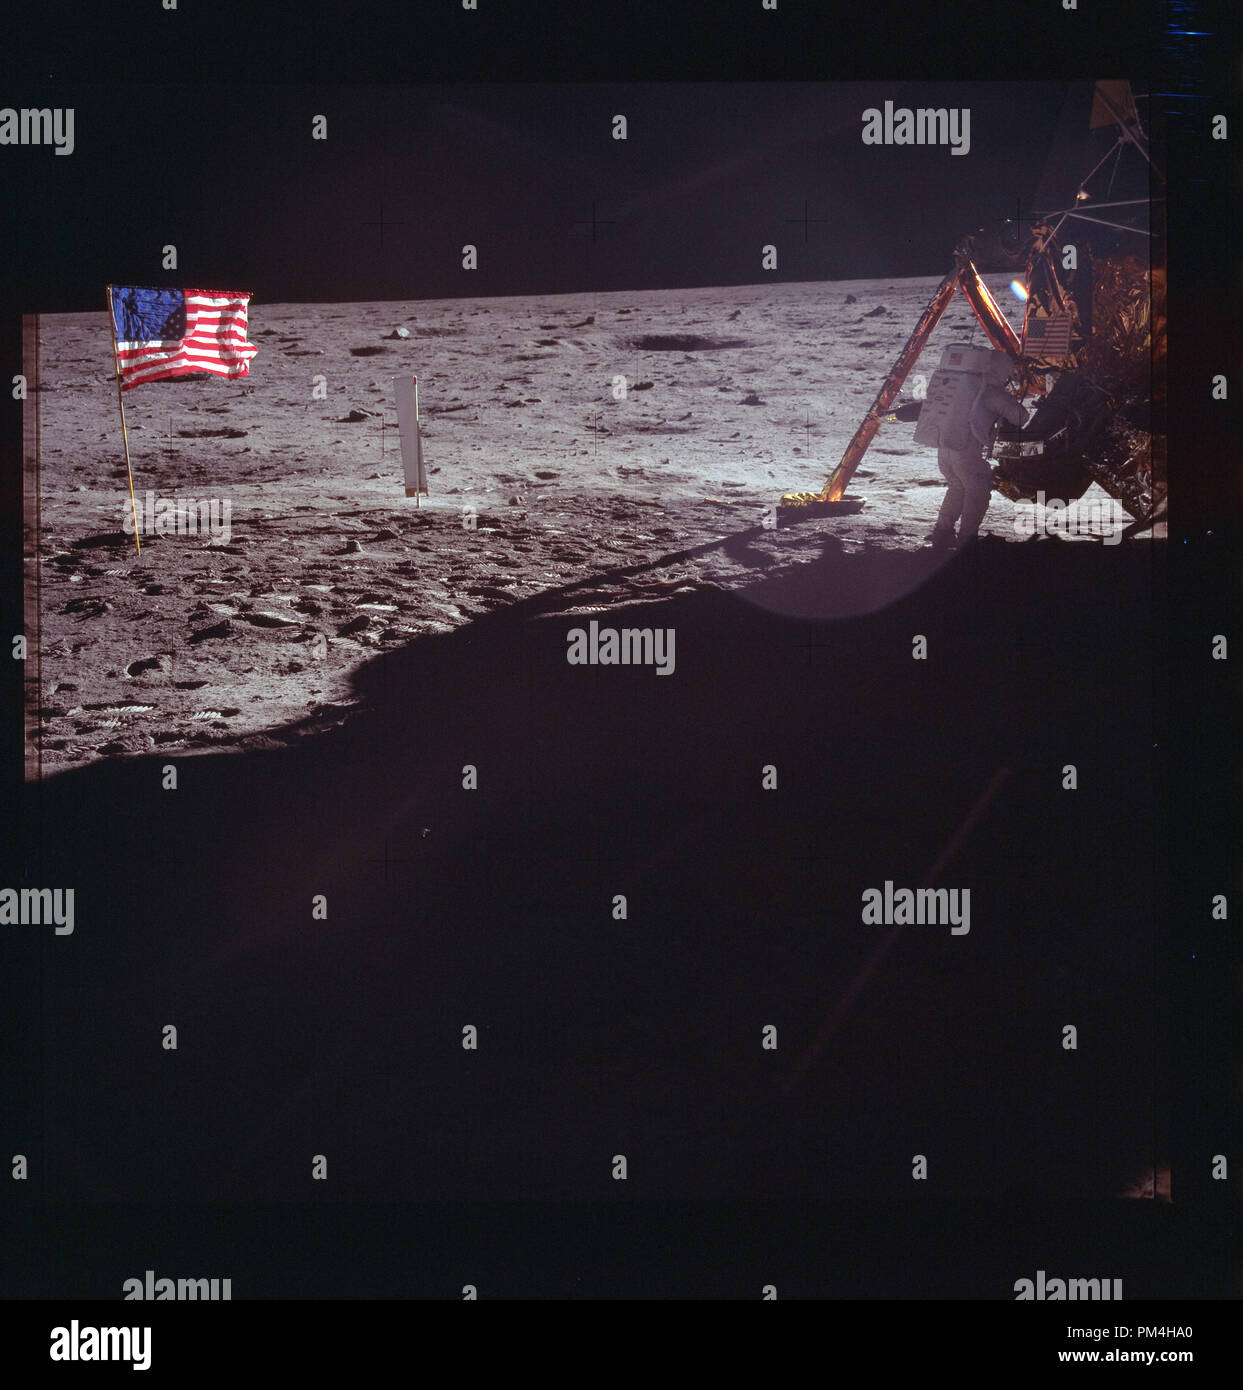 The American flag and Lunar landing module on the moon during July 20, 1969's  history making voyage to the moon.  File Reference # 1003 264THA Stock Photo